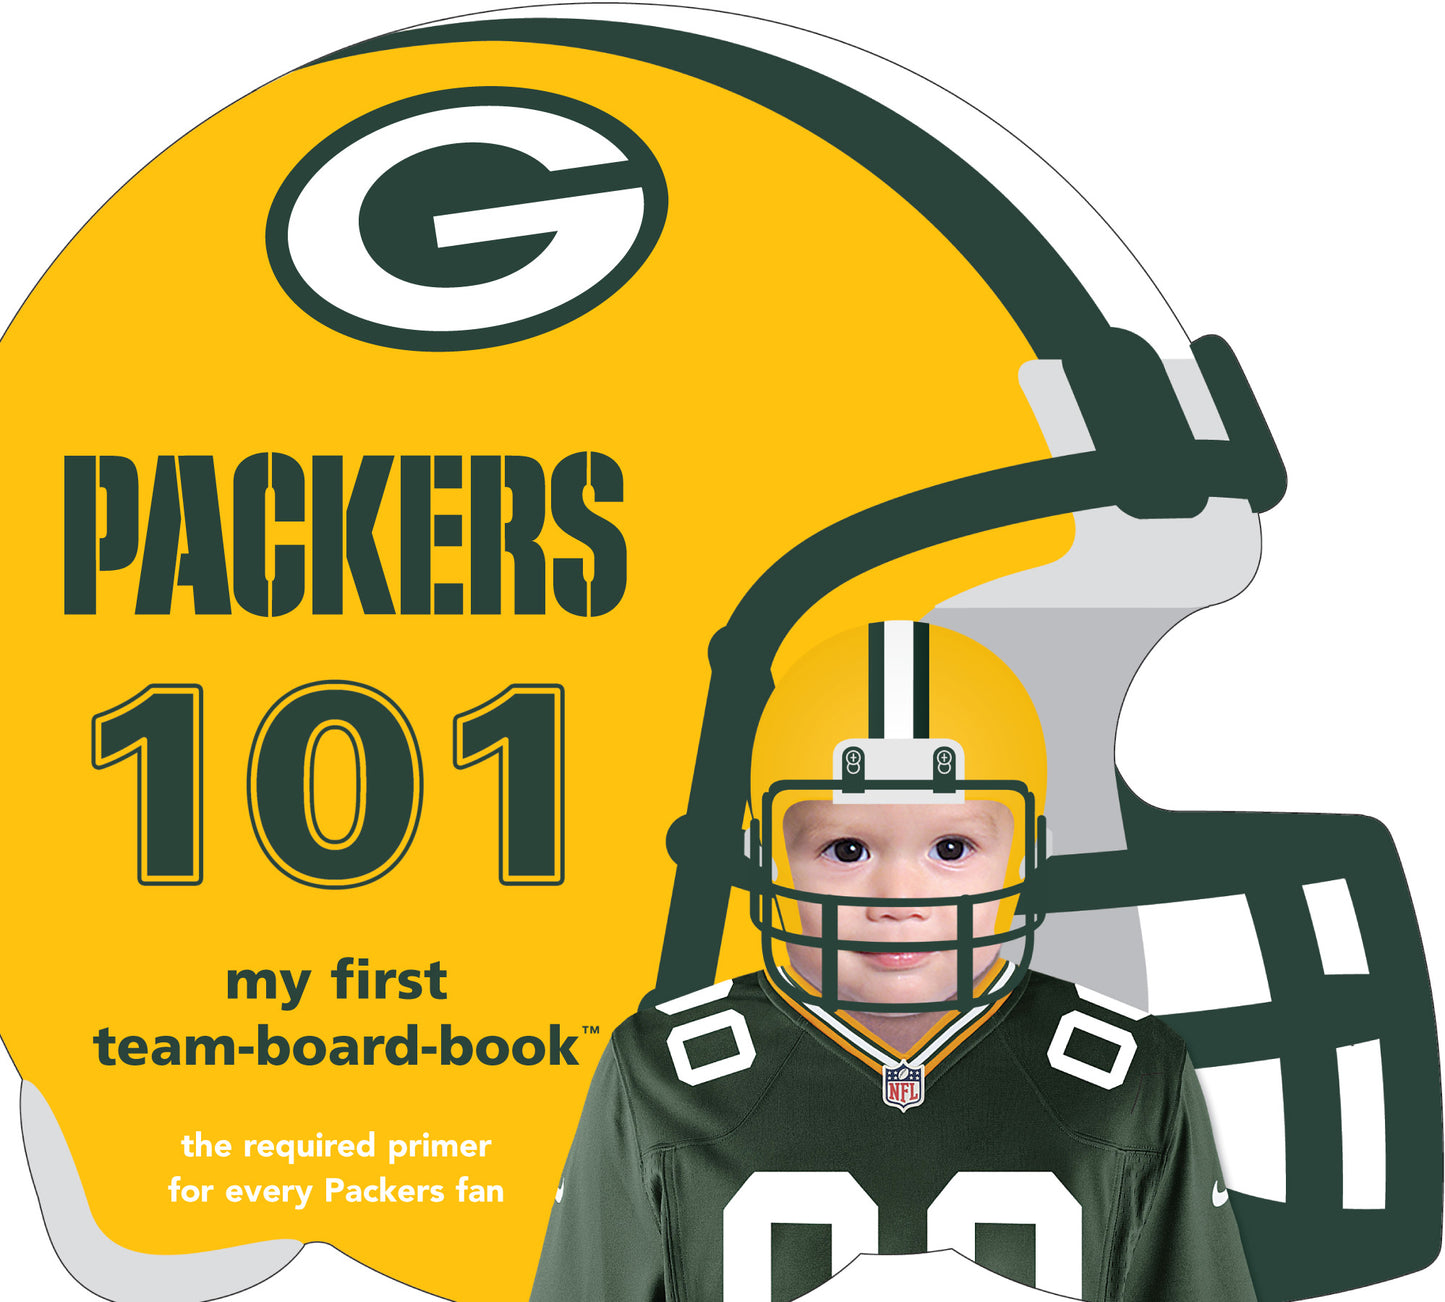 Green Bay Packers licensed NFL Gift Set-Book with Rally Paper